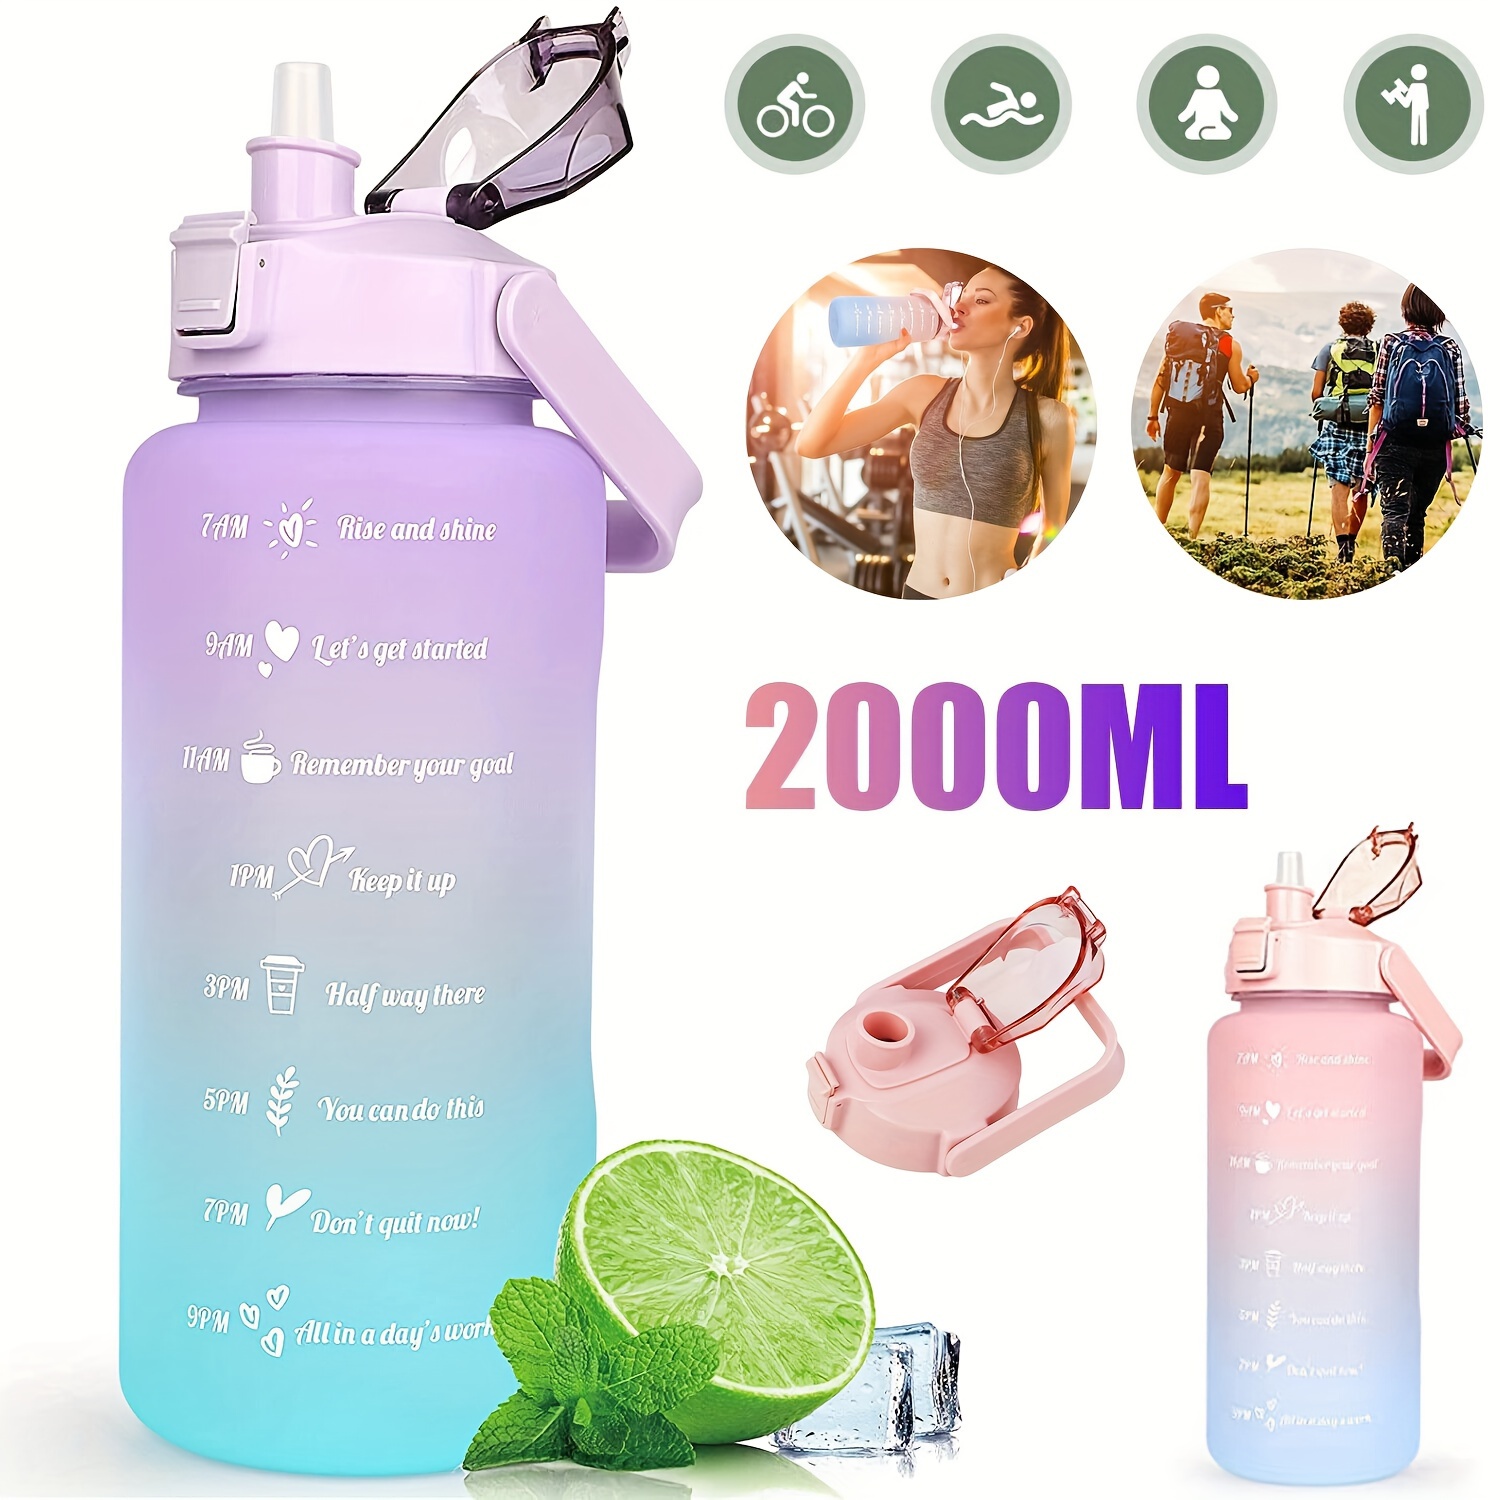 

Fitness Gym Water Bottle Spirit Motivational Water Gallon With Time Marker Large Capacity 2000ml, Leakproof Bpa Free Fitness Sports Water Bottle